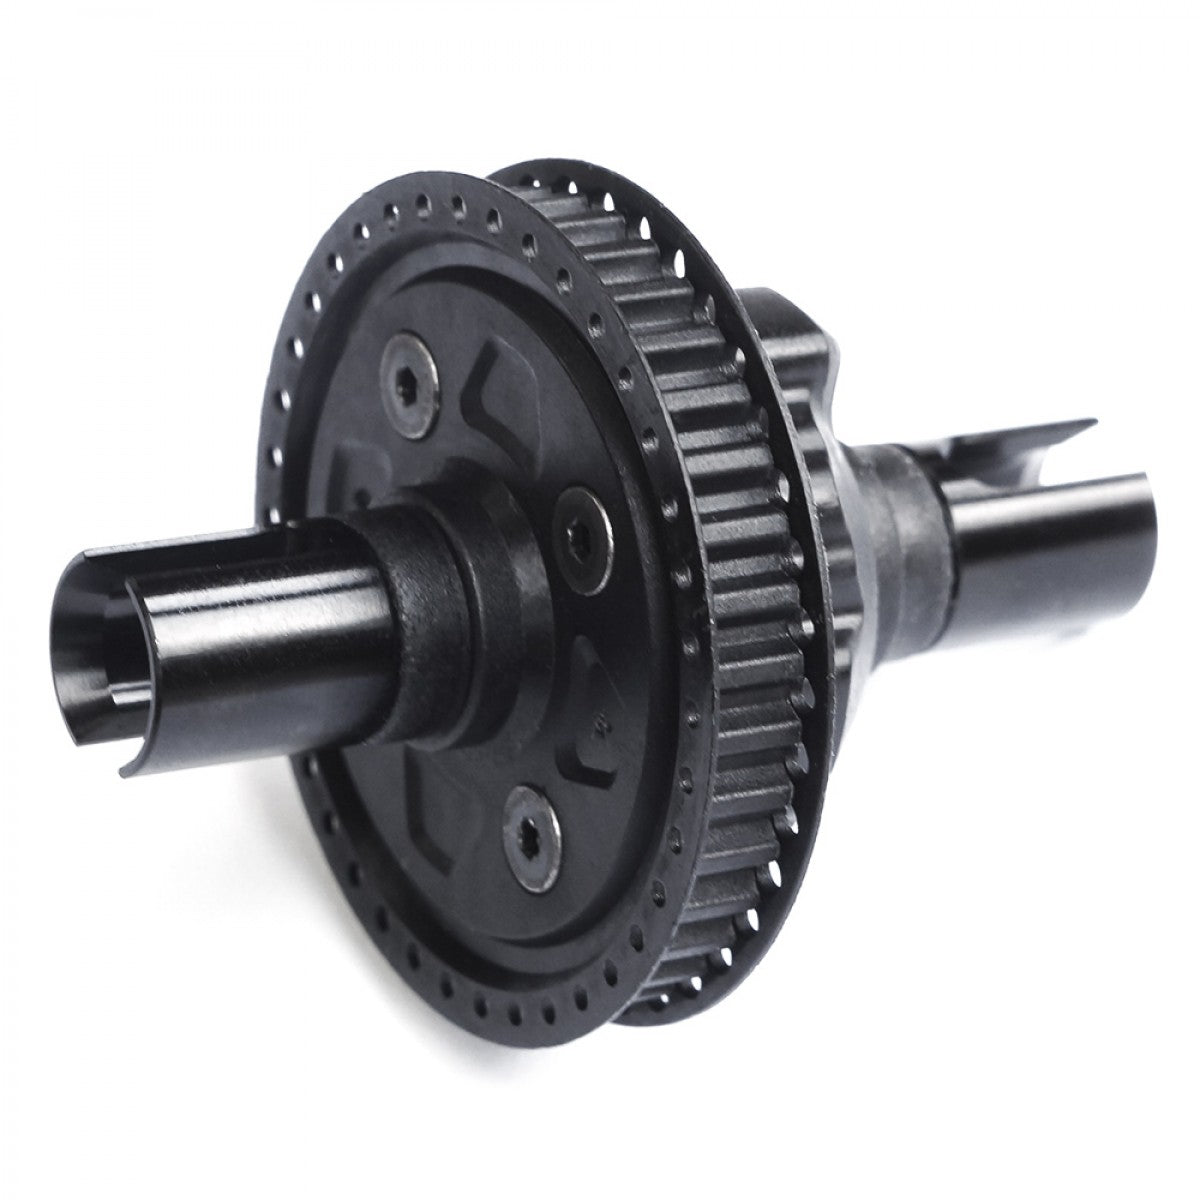 Xpress XP-10022 Gear Differential Set for XQ1 Xray T4